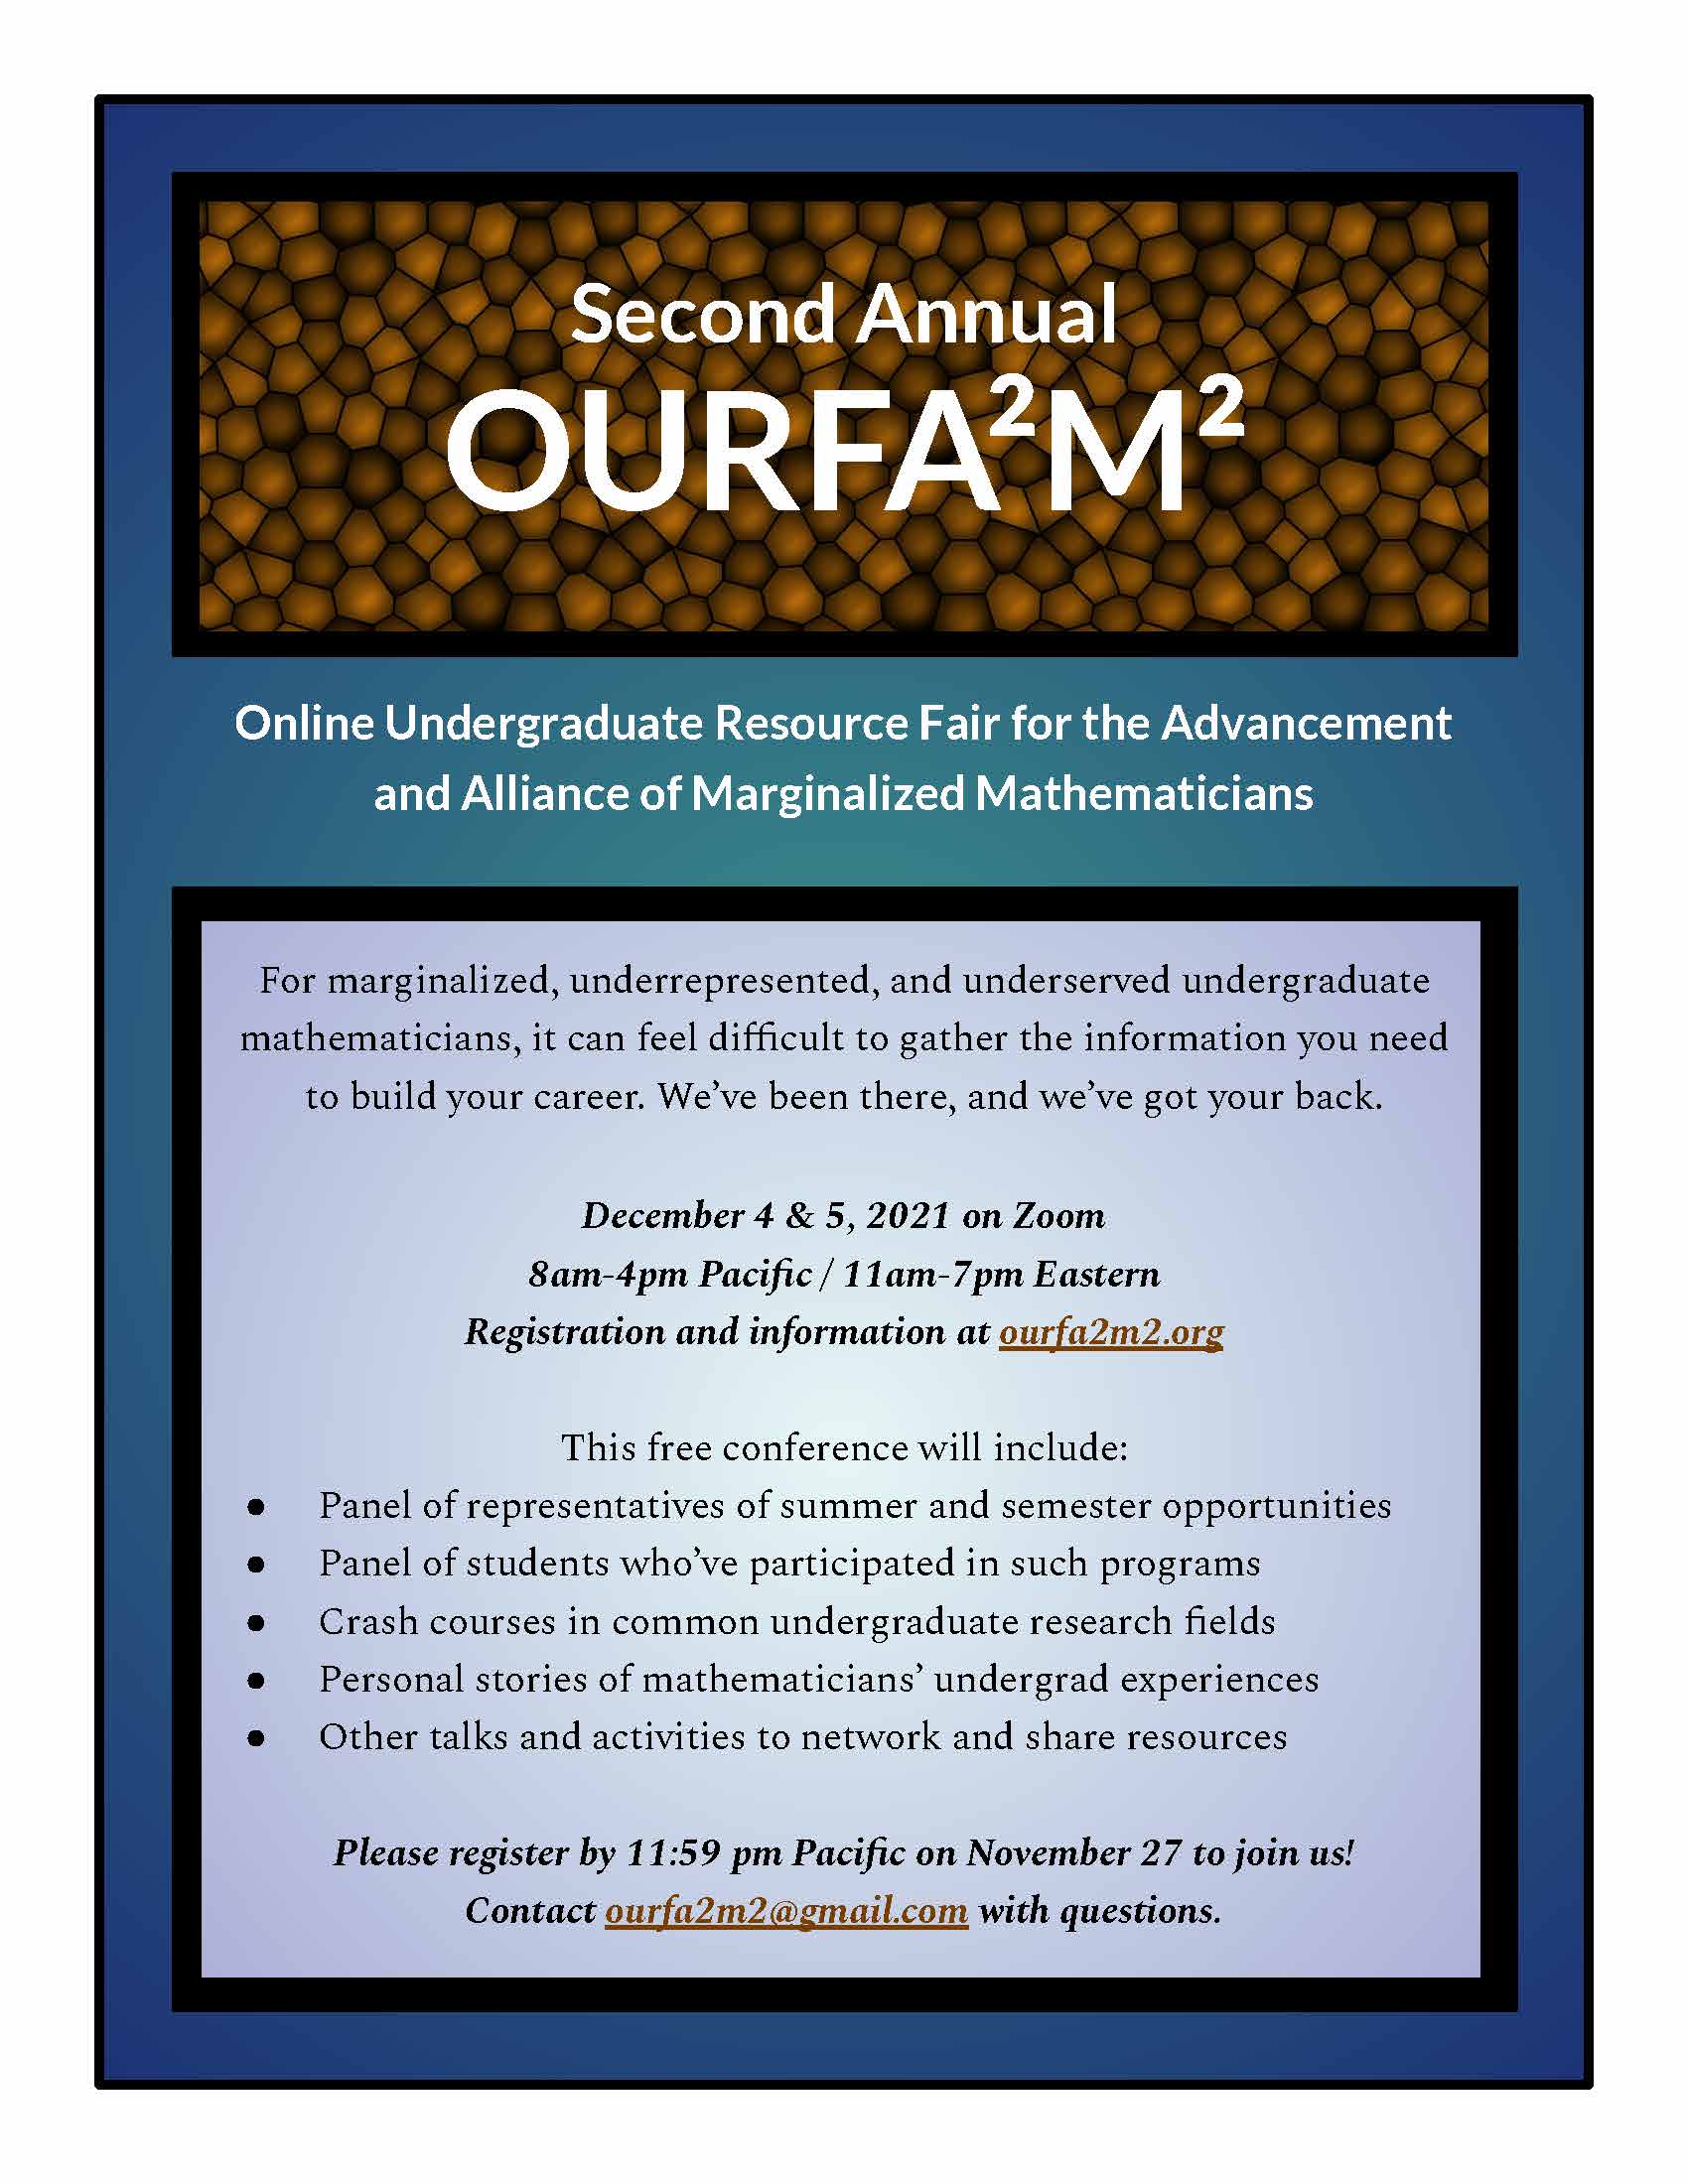 Online Undergraduate Resource Fair for the Advancement and Alliance of Marginalized Mathematicians